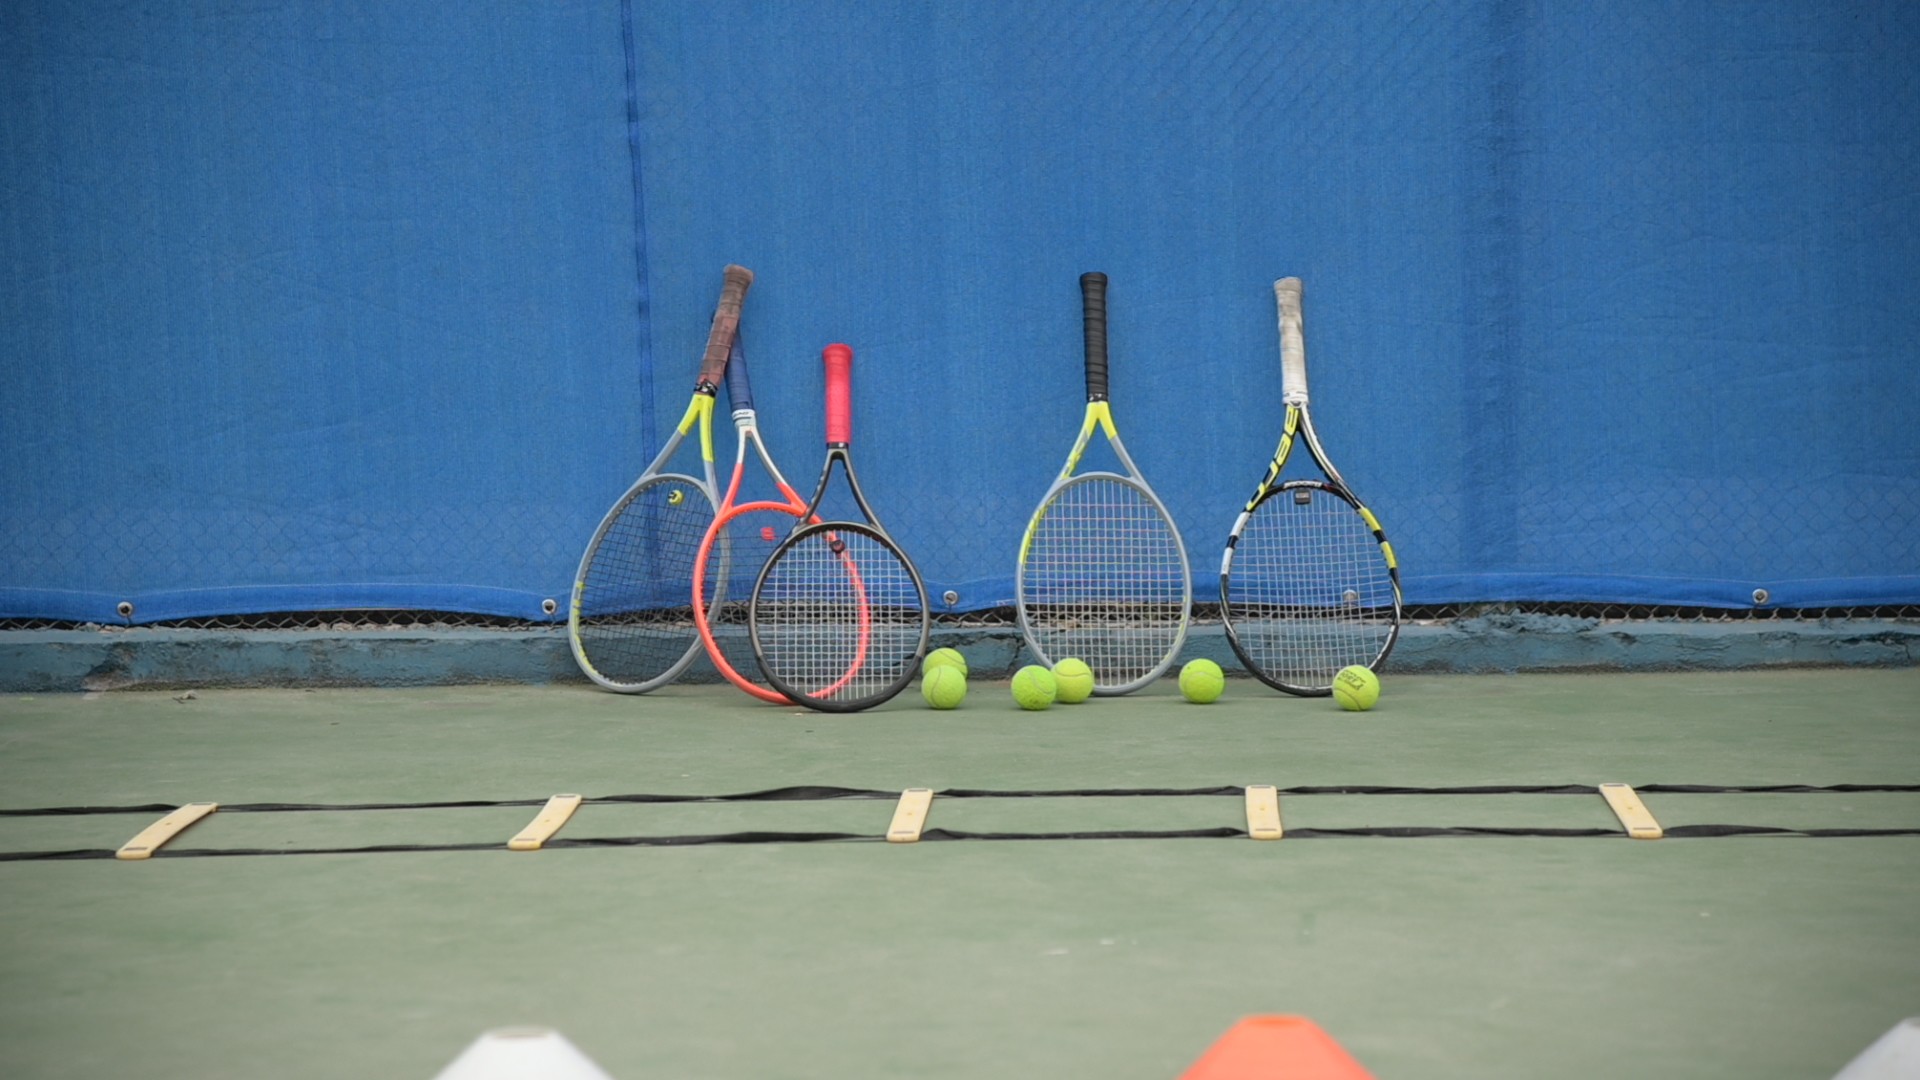 The equipments of tennis game